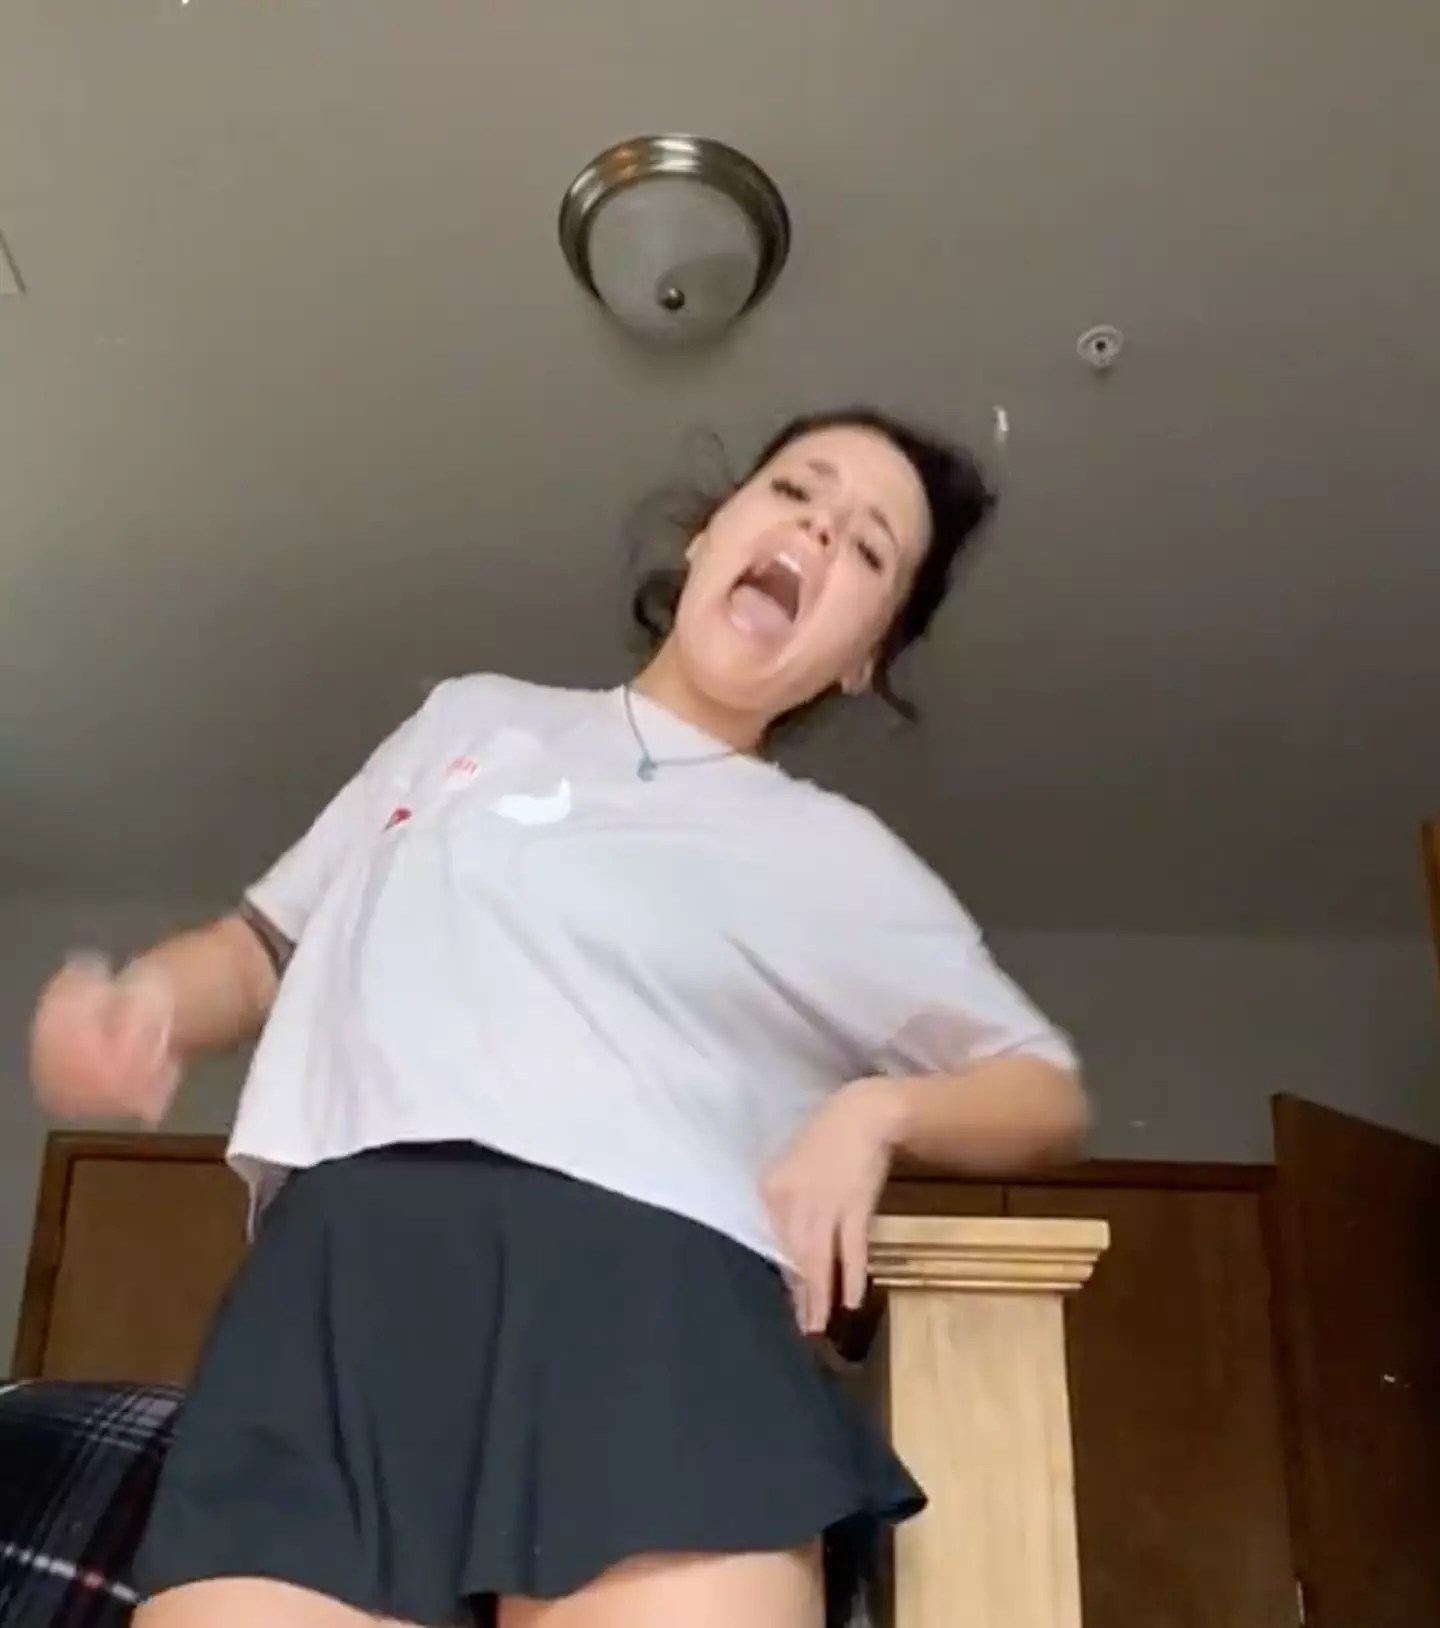 Katy Lorrell has gone viral on TikTok for hitting her back on her bedpost.